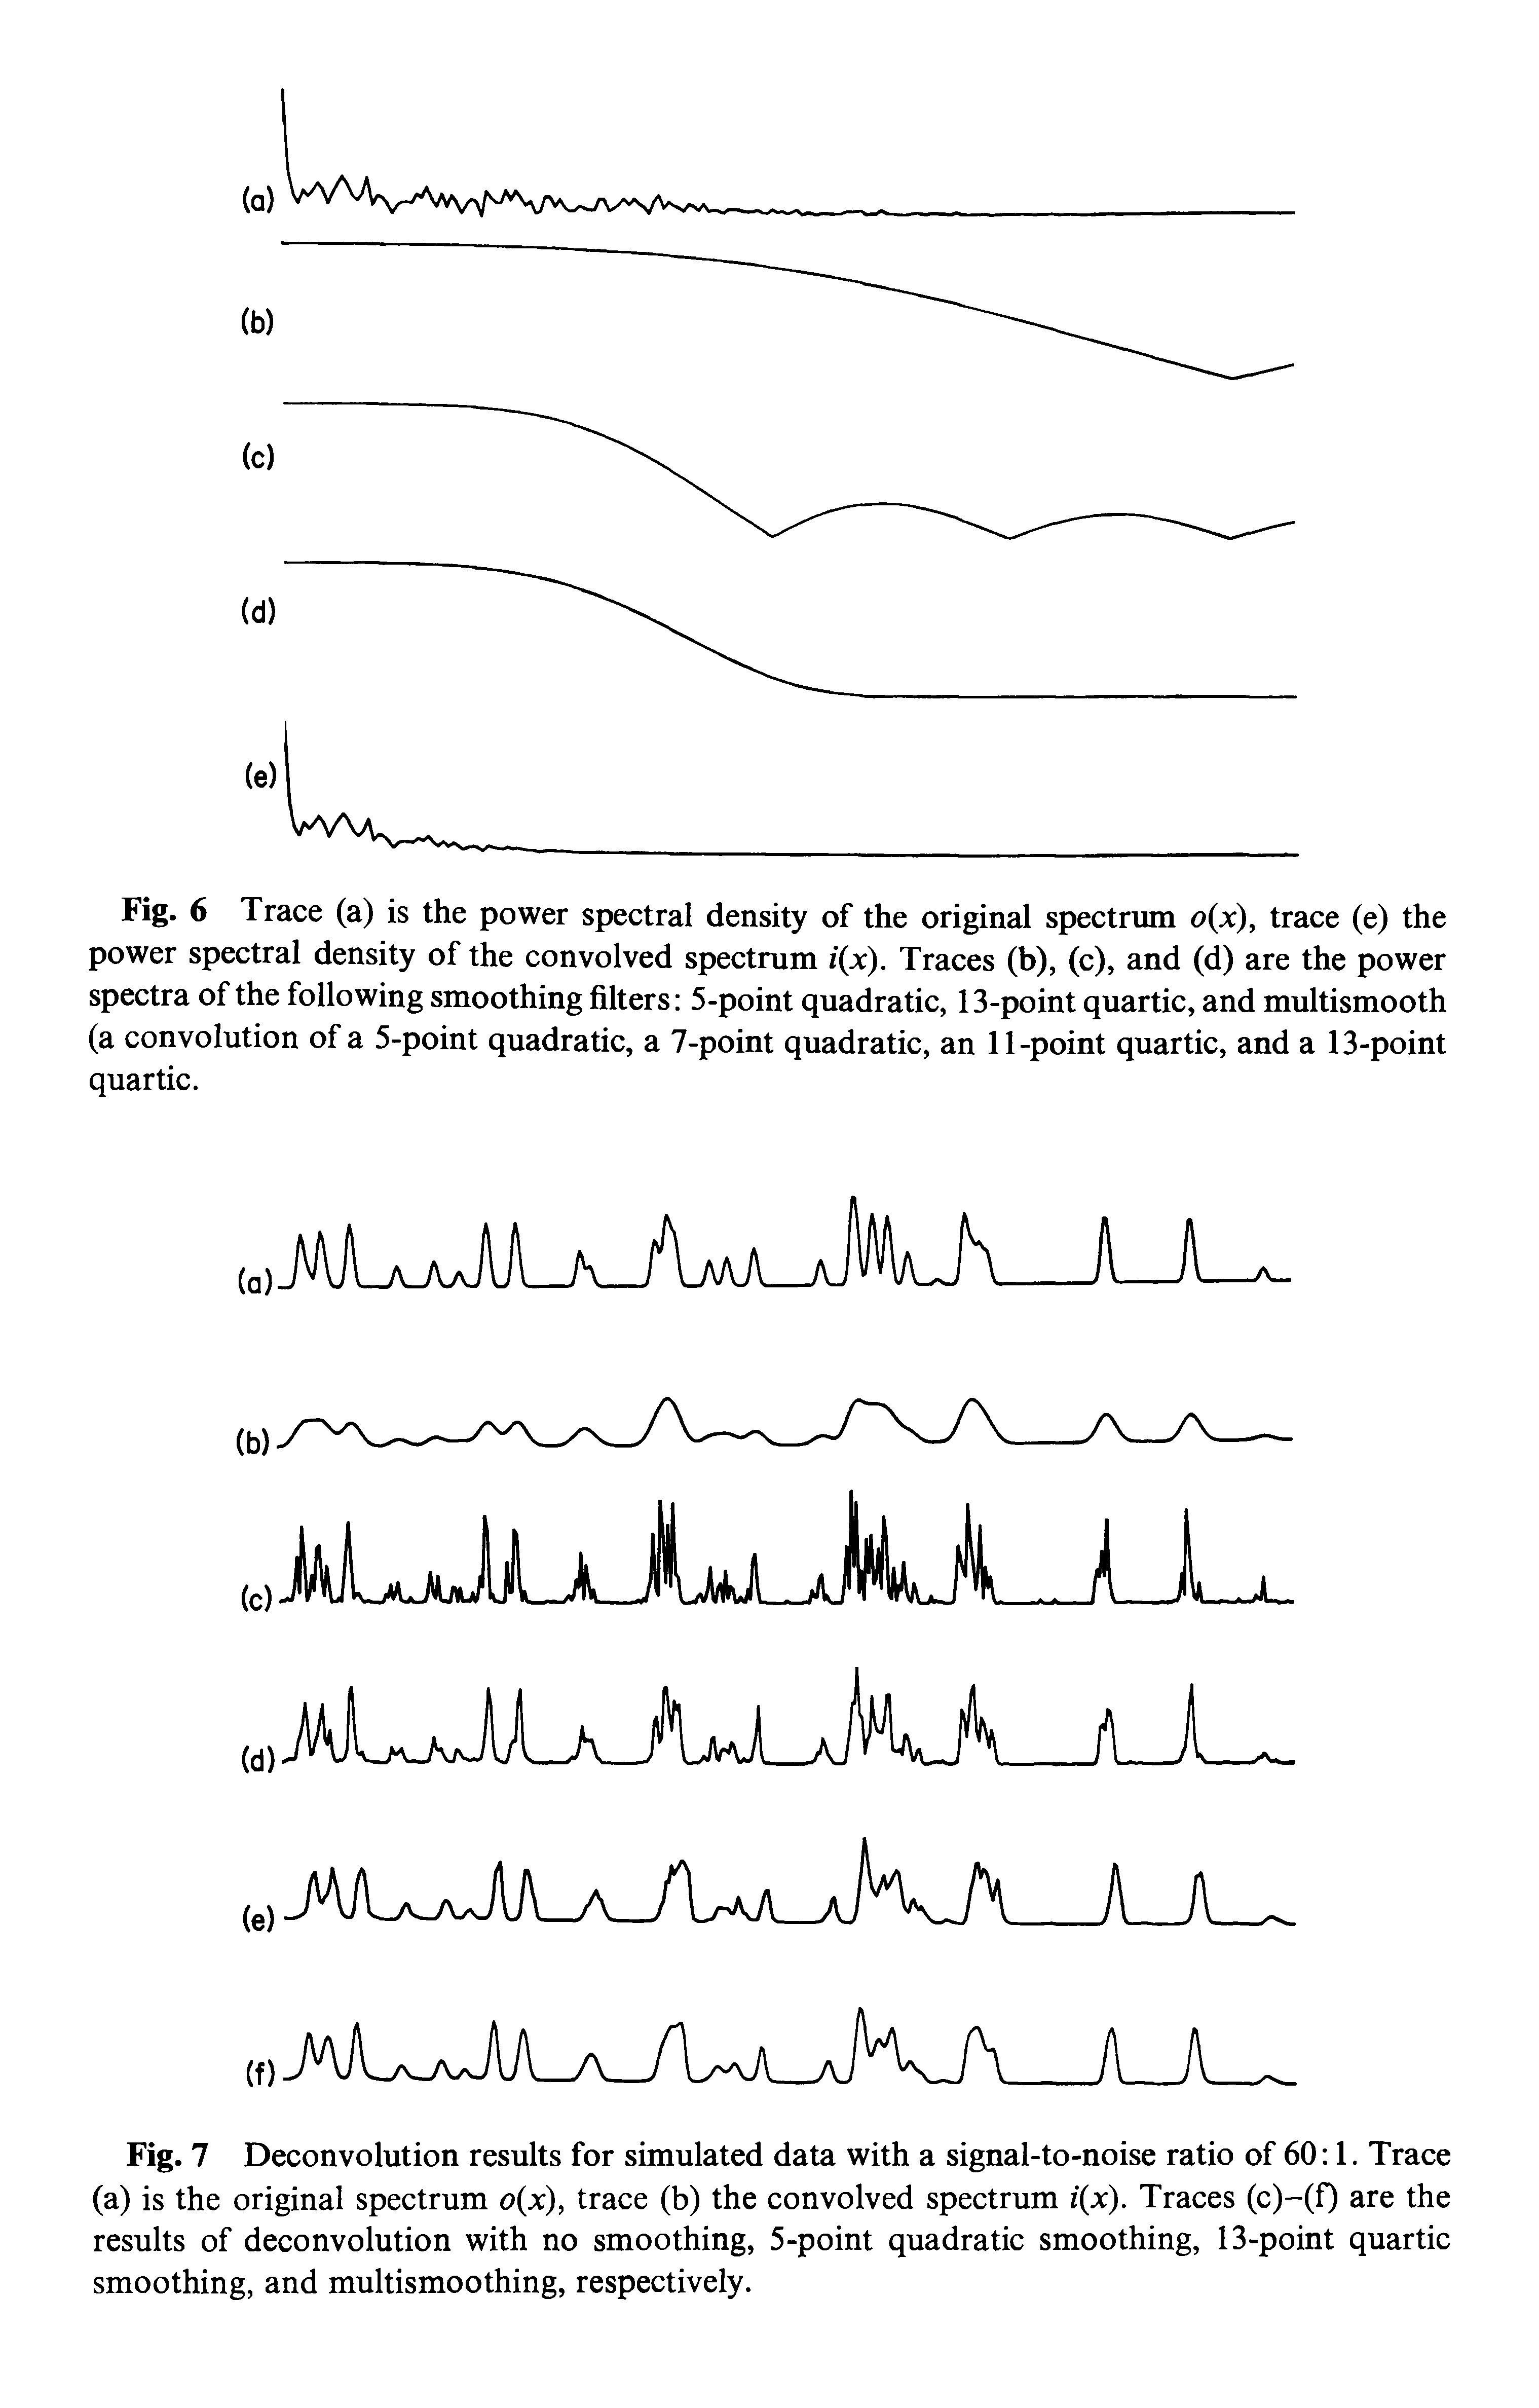 Fig. 6 Trace (a) is the power spectral density of the original spectrum o(x), trace (e) the power spectral density of the convolved spectrum /(jc). Traces (b), (c), and (d) are the power spectra of the following smoothing filters 5-point quadratic, 13-point quartic, and multismooth (a convolution of a 5-point quadratic, a 7-point quadratic, an 11-point quartic, and a 13-point quartic.